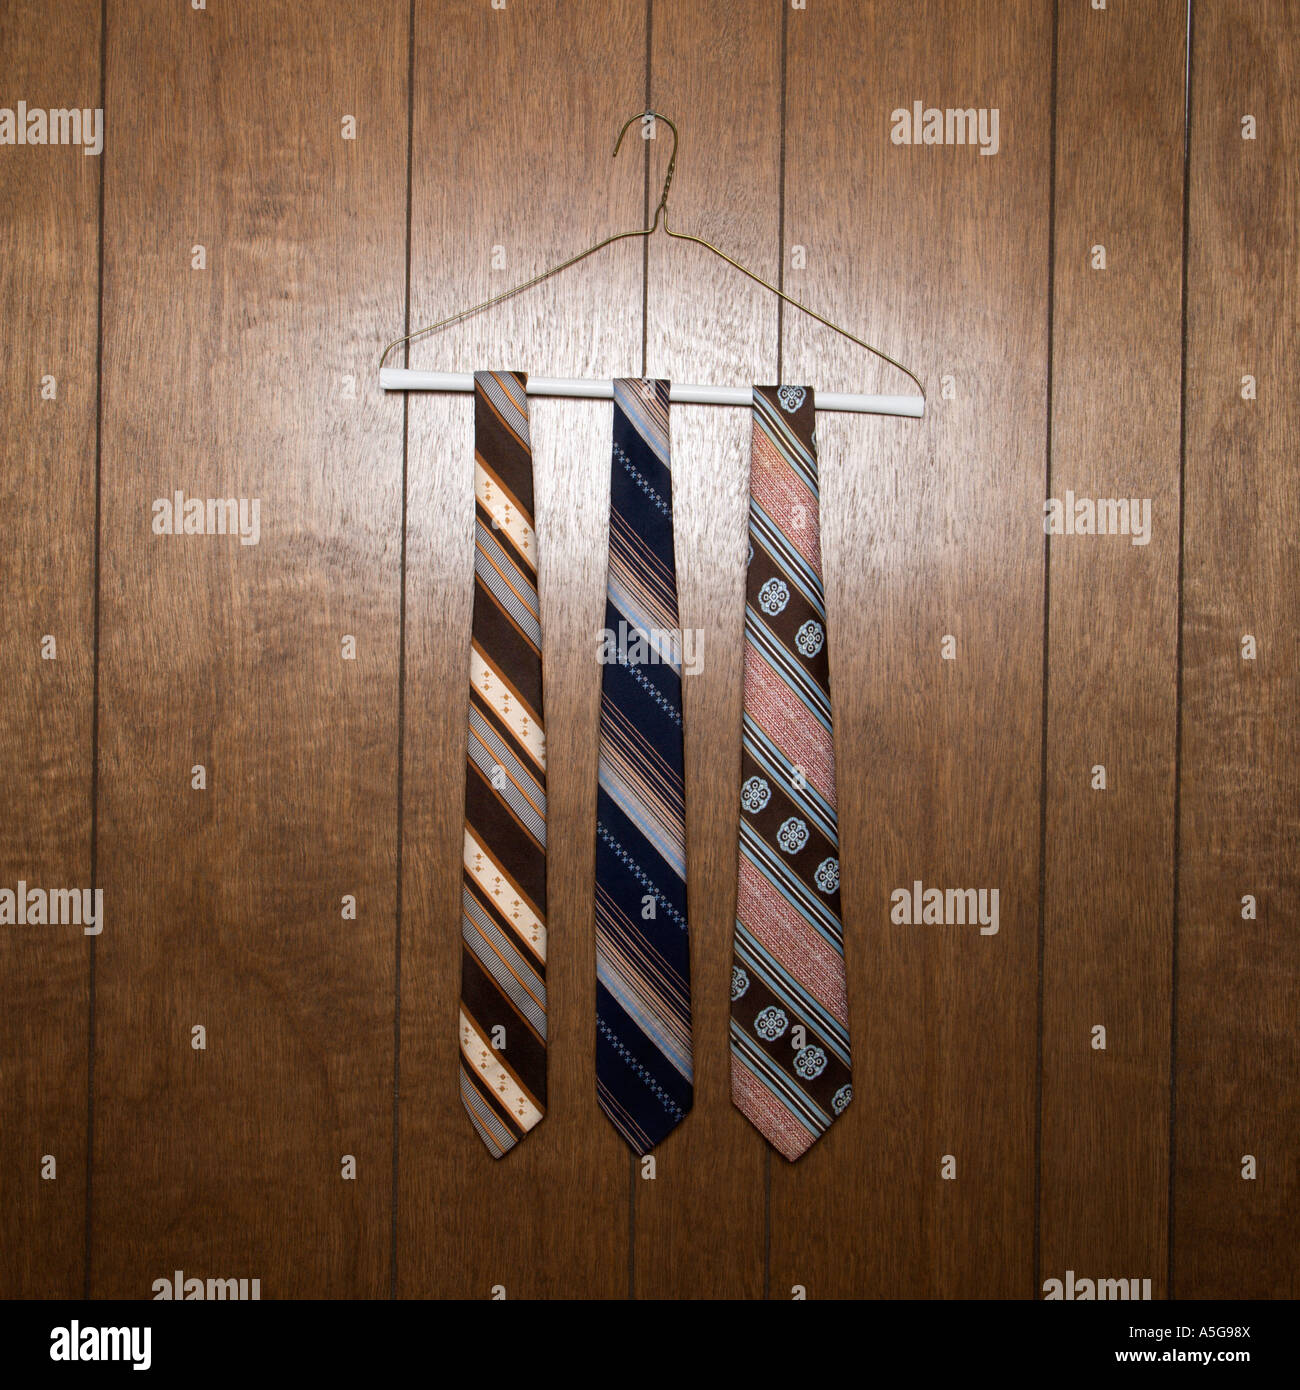 Three retro ties hanging on a wire hanger against wood paneling Stock Photo